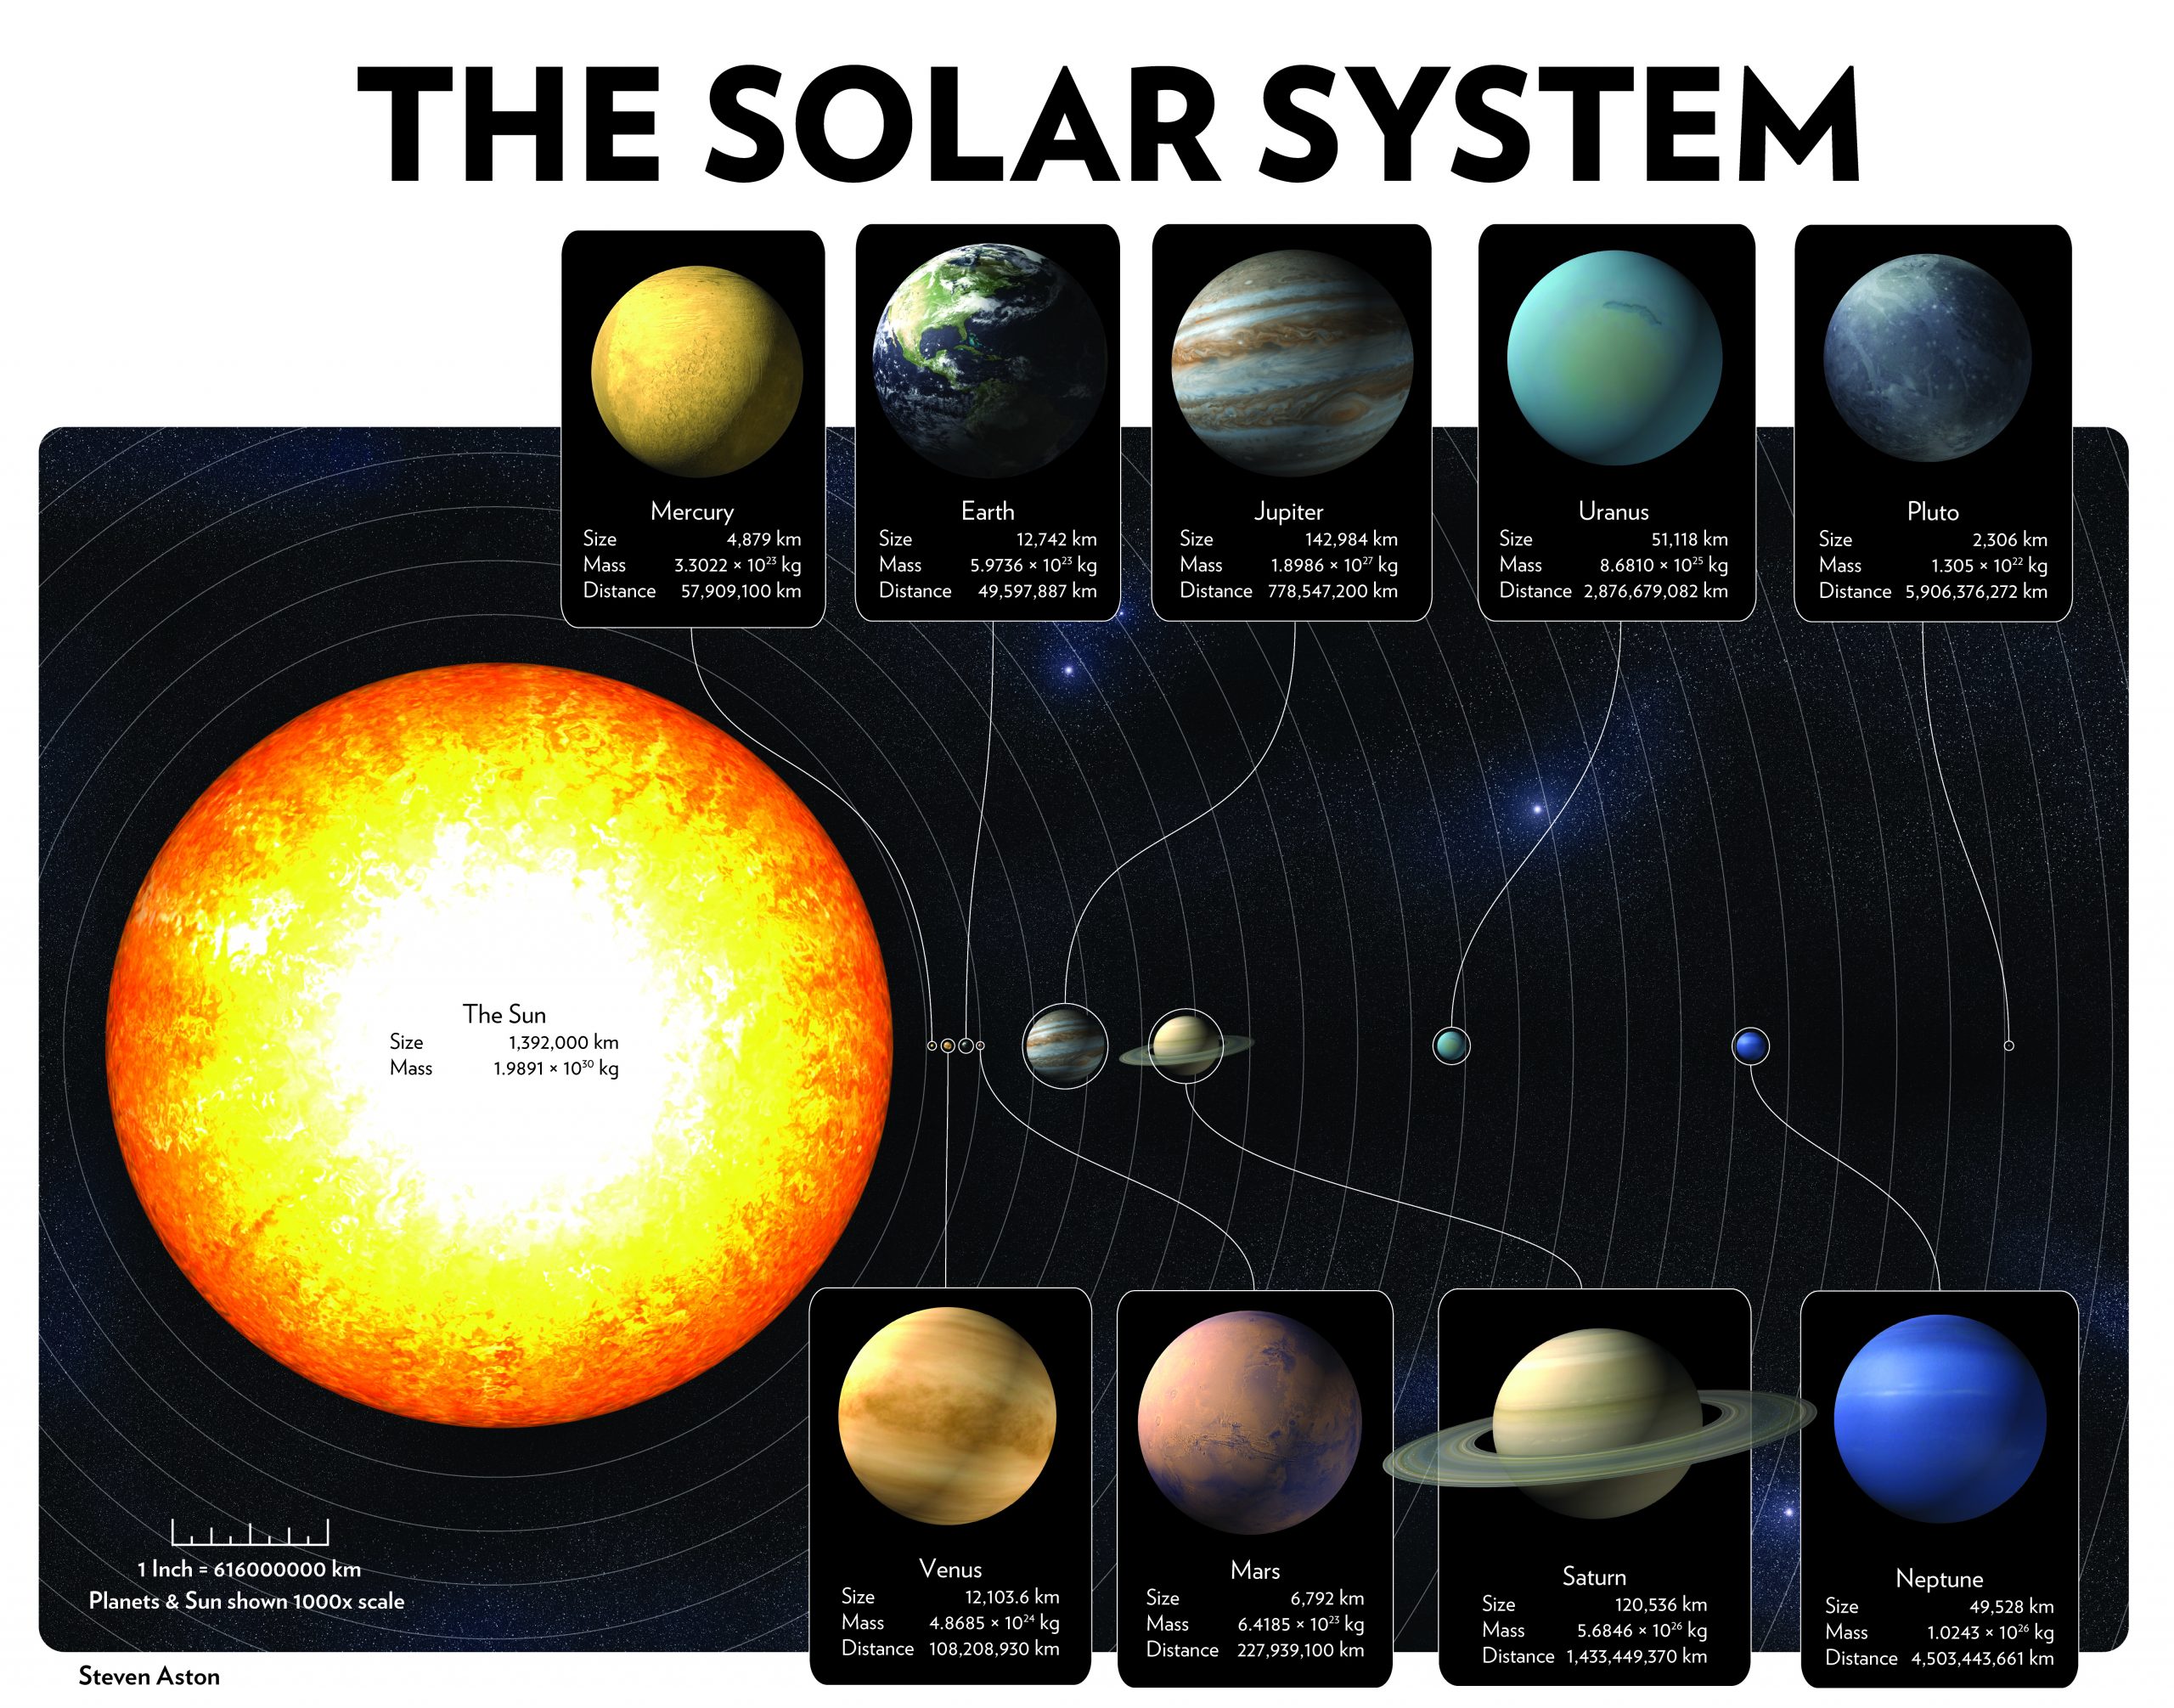 The Solar Systems Planets, Size, and Orbits